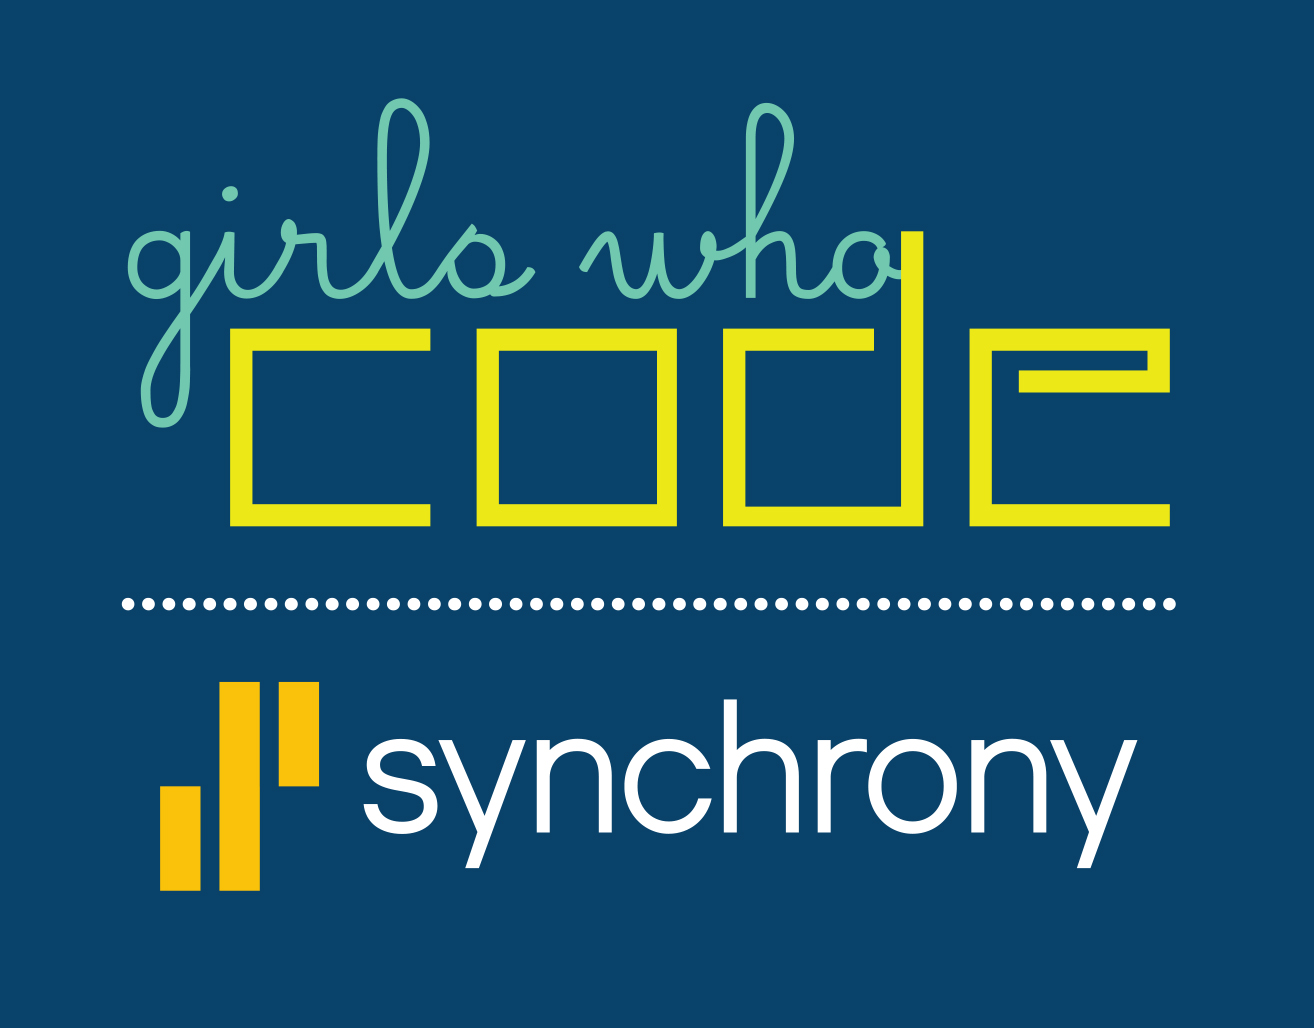 Girls Who Code and Synchrony logo